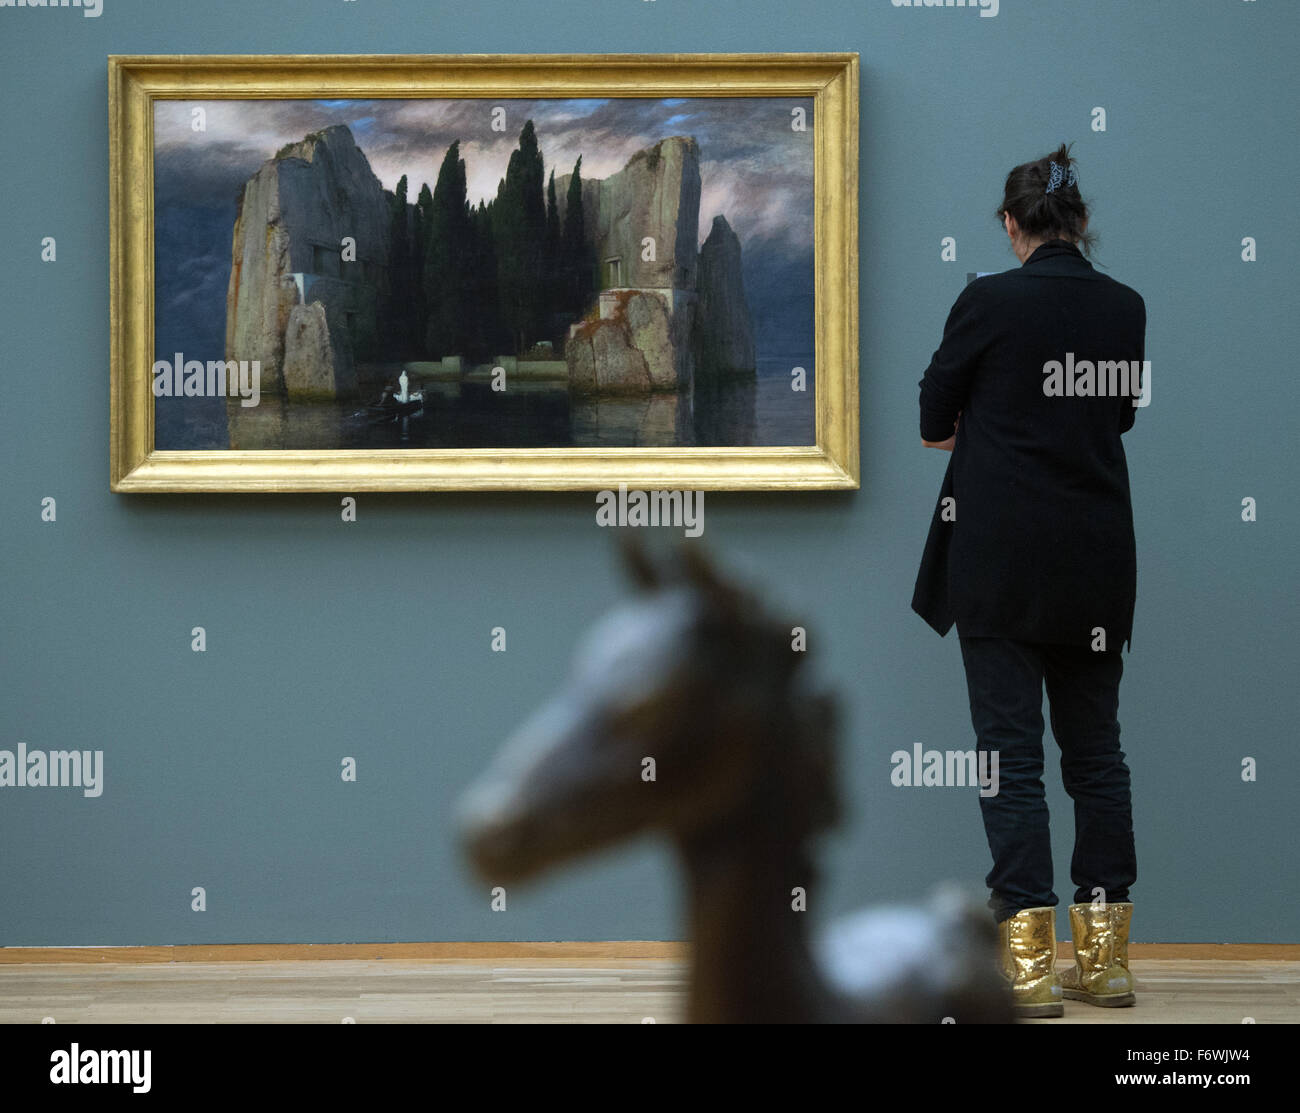 A woman looks at the painting 'Die Toteninsel' (lit. island of the dead') from 1883 by artist Arnold Boecklin during a preview of the exhibition 'The Black Years. Histories of a Collection: 1933?1945' at the Hamburger Bahnhof exhibition venue in Berlin, Germany, 20 November 2015. In the foreground stands the bronze sculpture titled 'Großes Vollblutfohlen' (lit. large thoroughbred foal) from 1940 by artist Renee Sintenis on display.   The exhibition showcases works of art  which were crafted during the Nazi era or confiscated by the Nazis. The exhibition 'The Black Years. Histories of a Collect Stock Photo